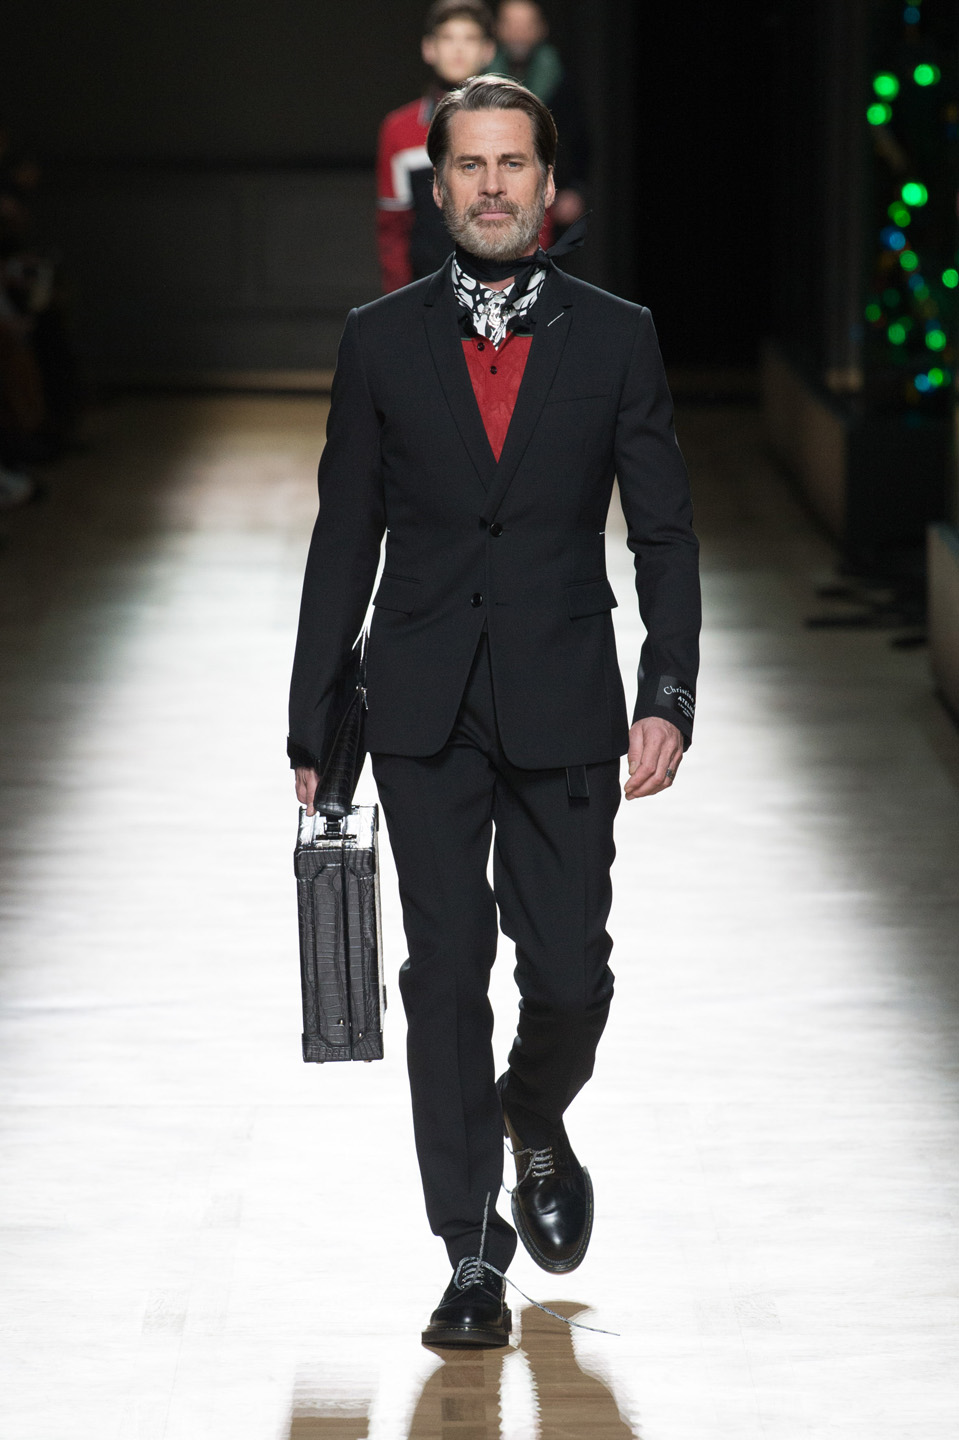 DIOR HOMME WINTER 18 19 BY PATRICE STABLE look12 Fall/WInter 2018 runway